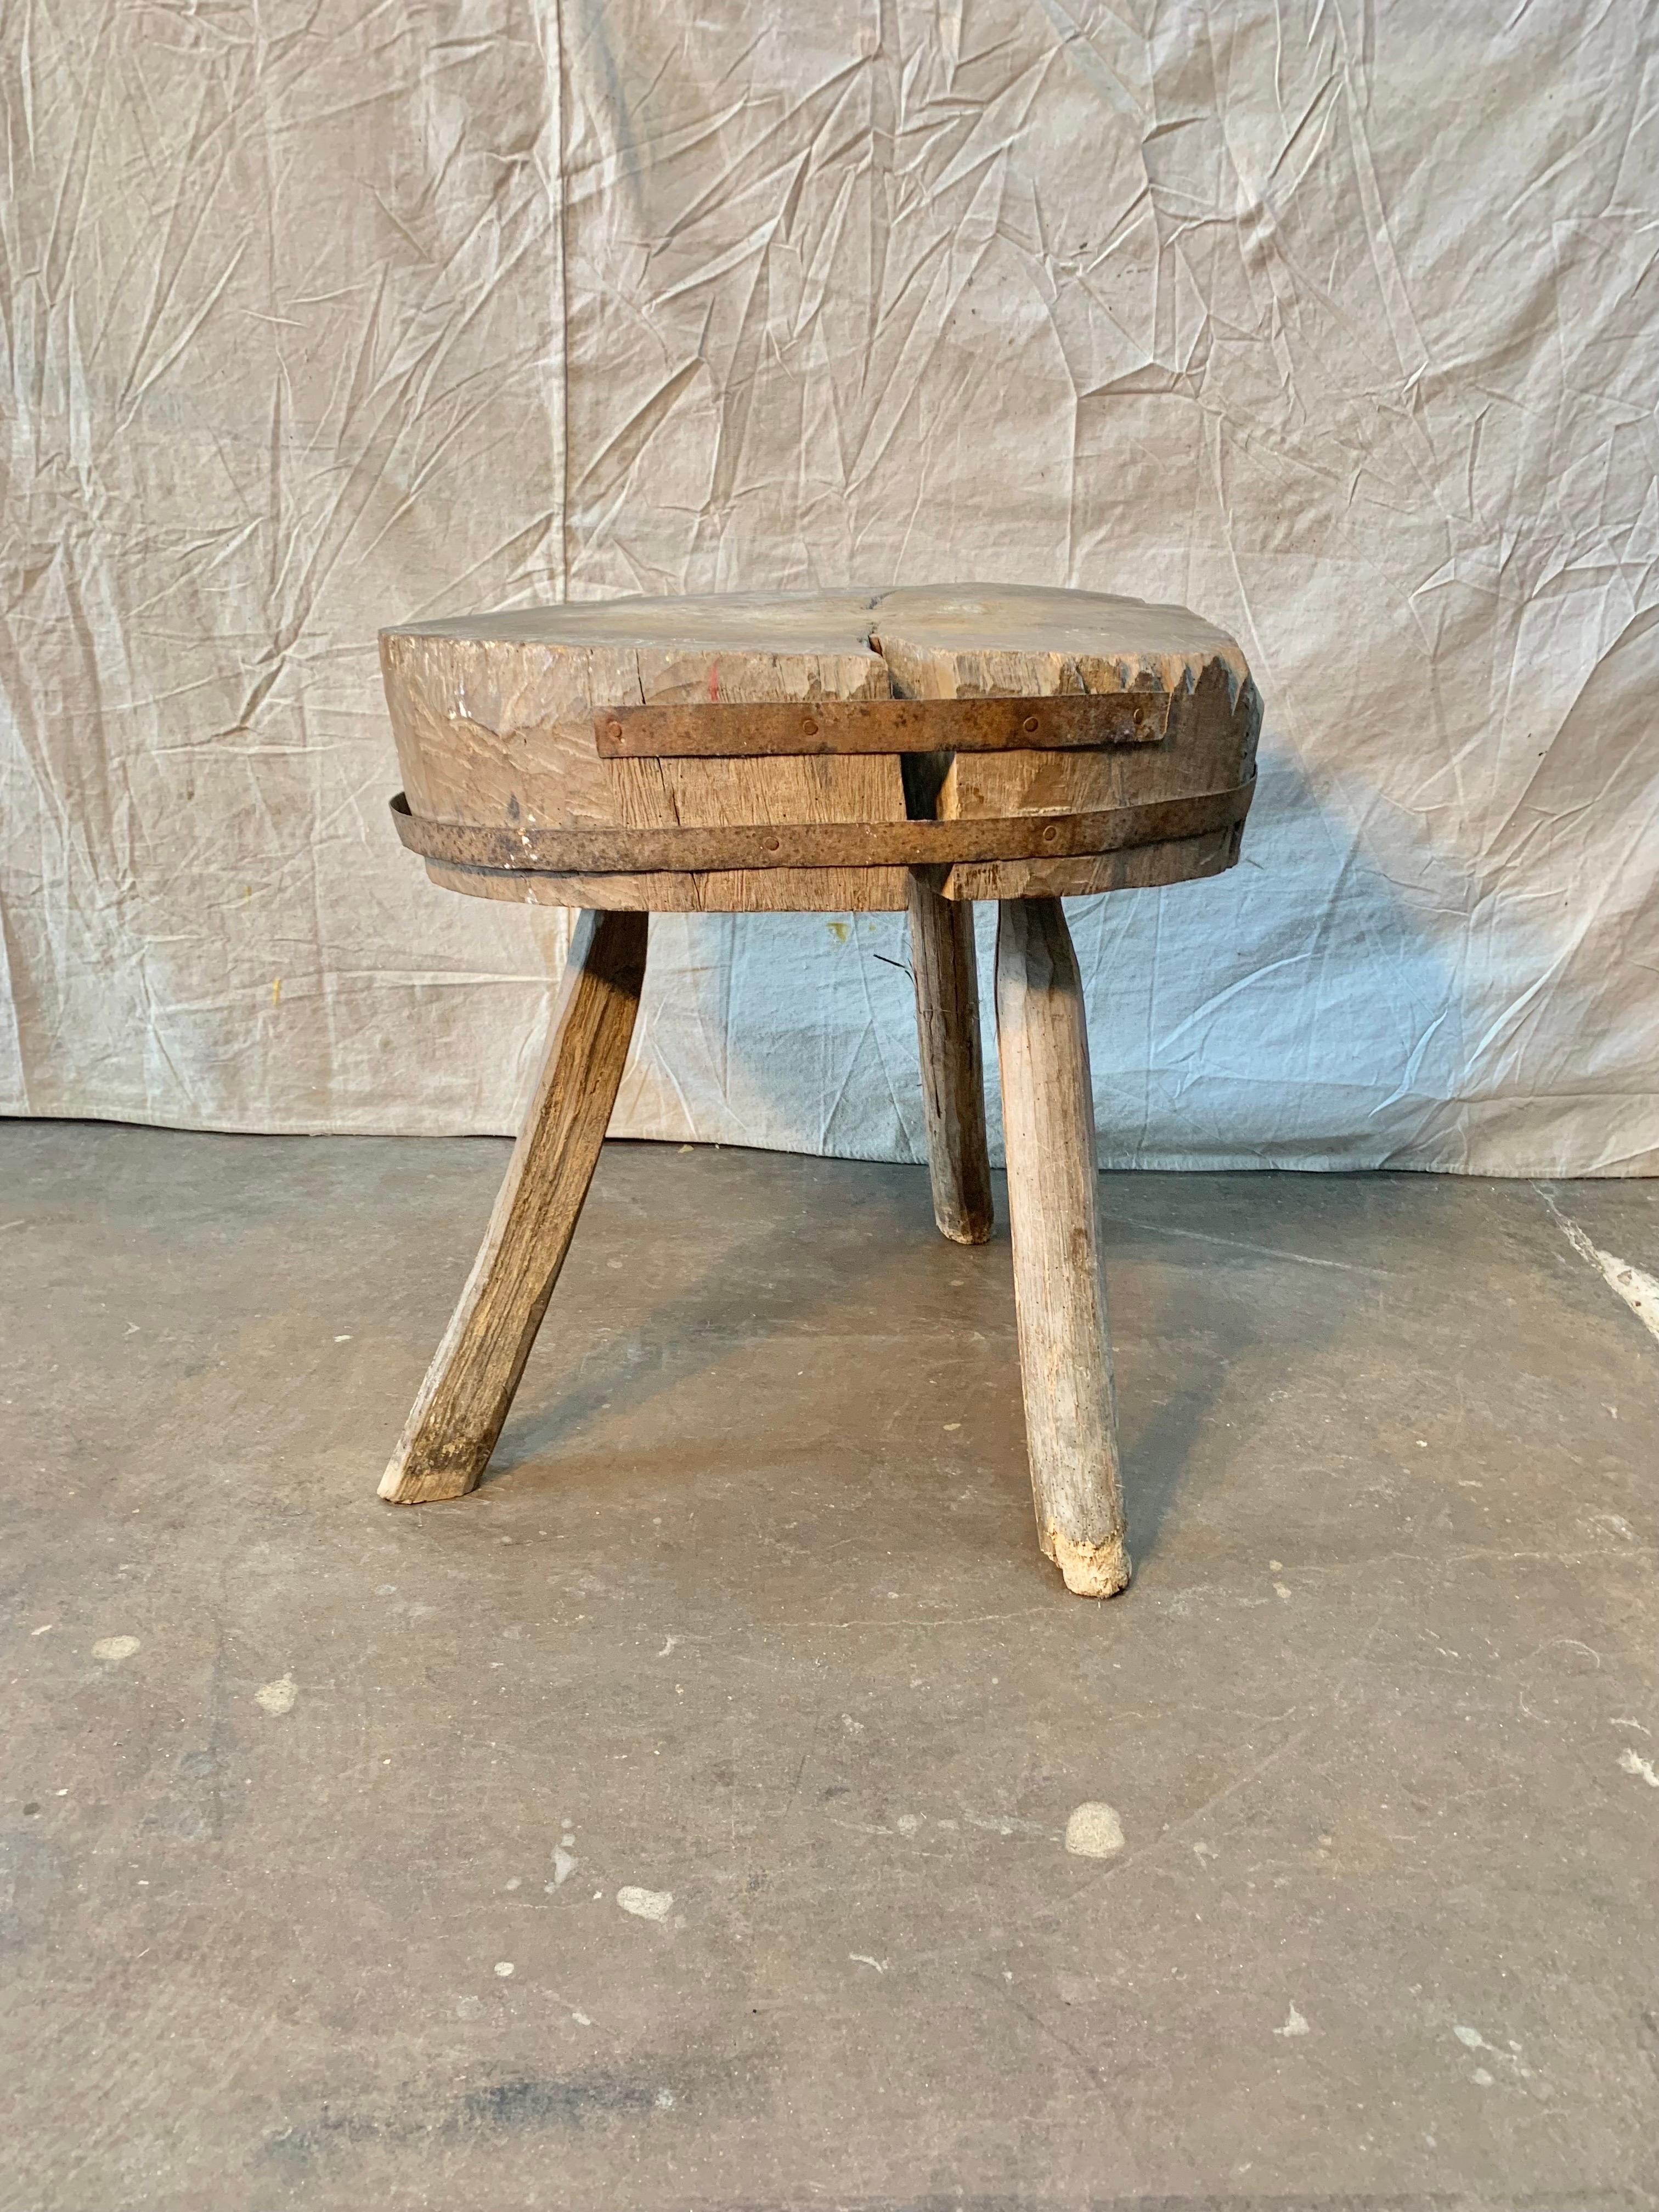 Found in the Provence region of France, this rustic French Butcher Table was once used in an outdoor market or on a farm. Handmade from a single tree trunk and secured with iron straps, the butcher block stands on three legs. A unique accent table,